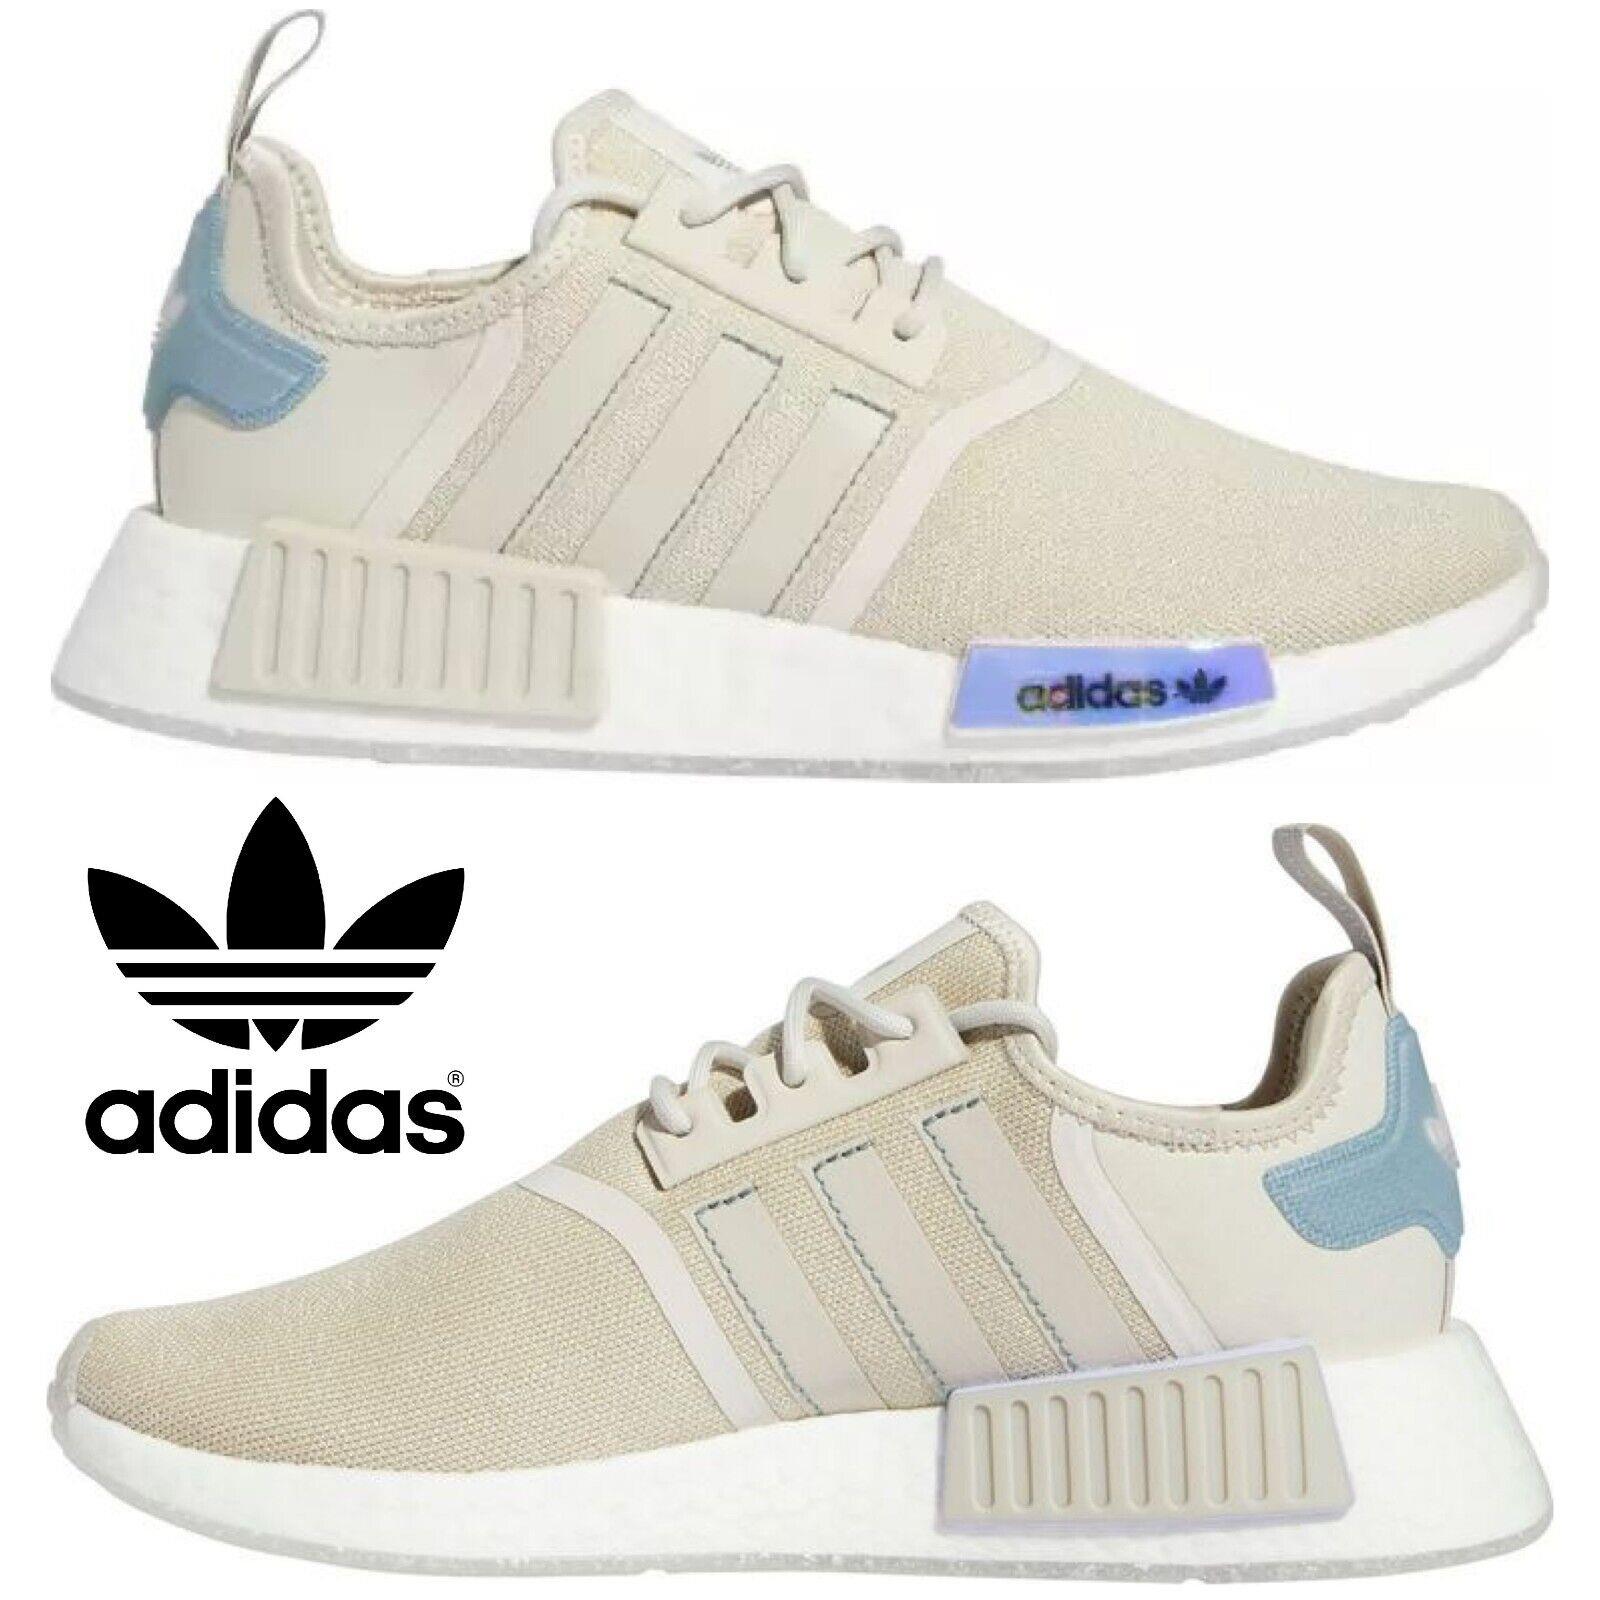 Adidas Originals Nmd R1 Women s Sneakers Casual Shoes Sport Running Clear Brown